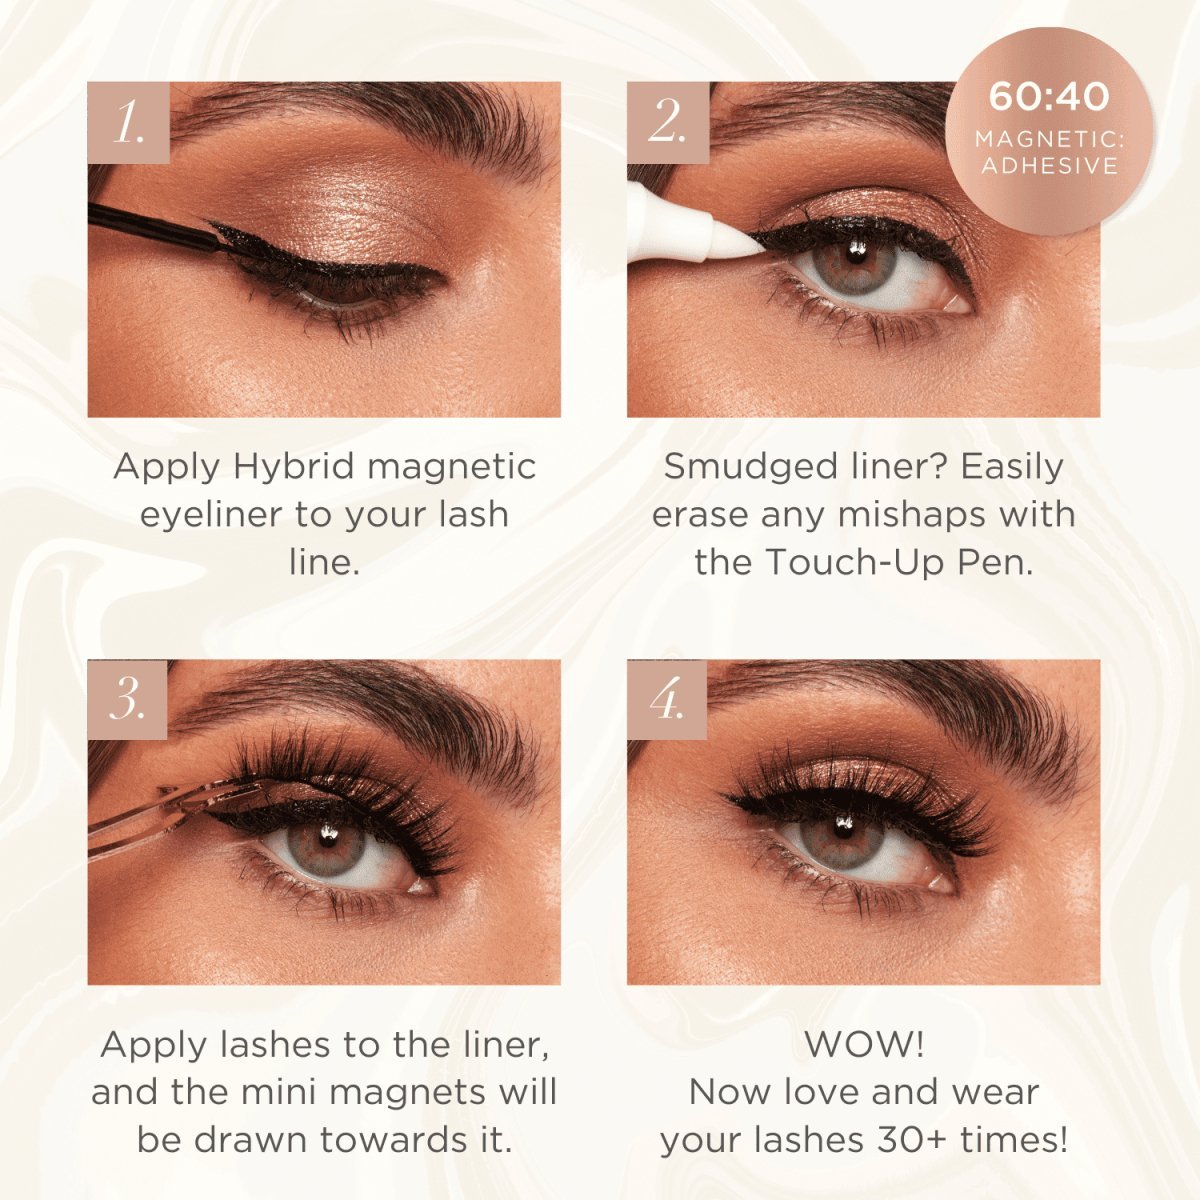 Daisy Chain Magnetic Lashes - Lola's Lashes